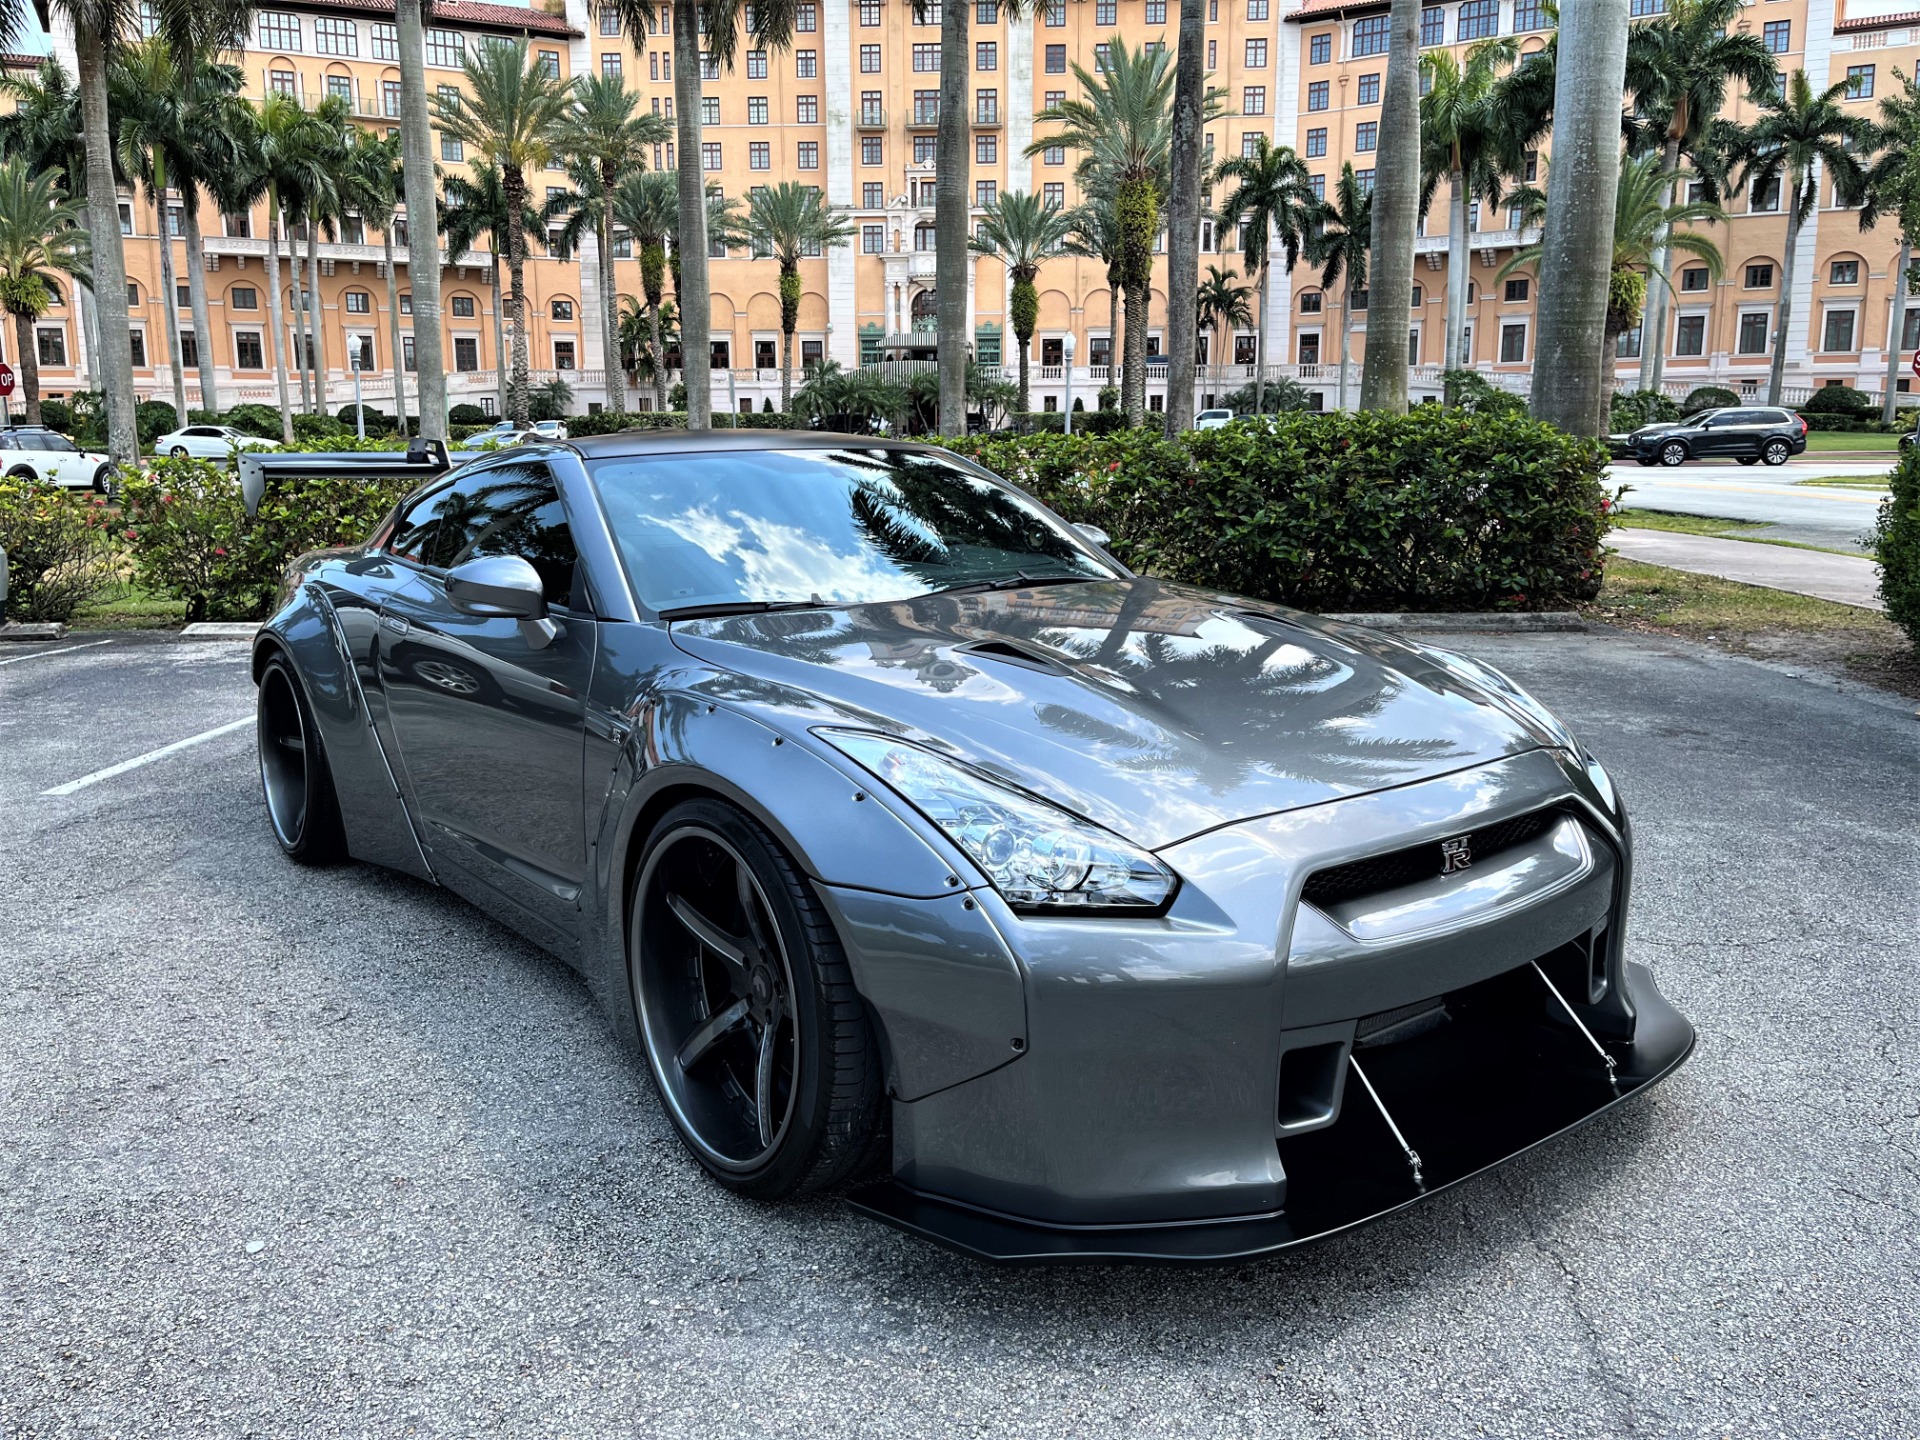 Used 2014 Nissan GT-R Track Edition for sale $144,850 at The Gables Sports Cars in Miami FL 33146 3